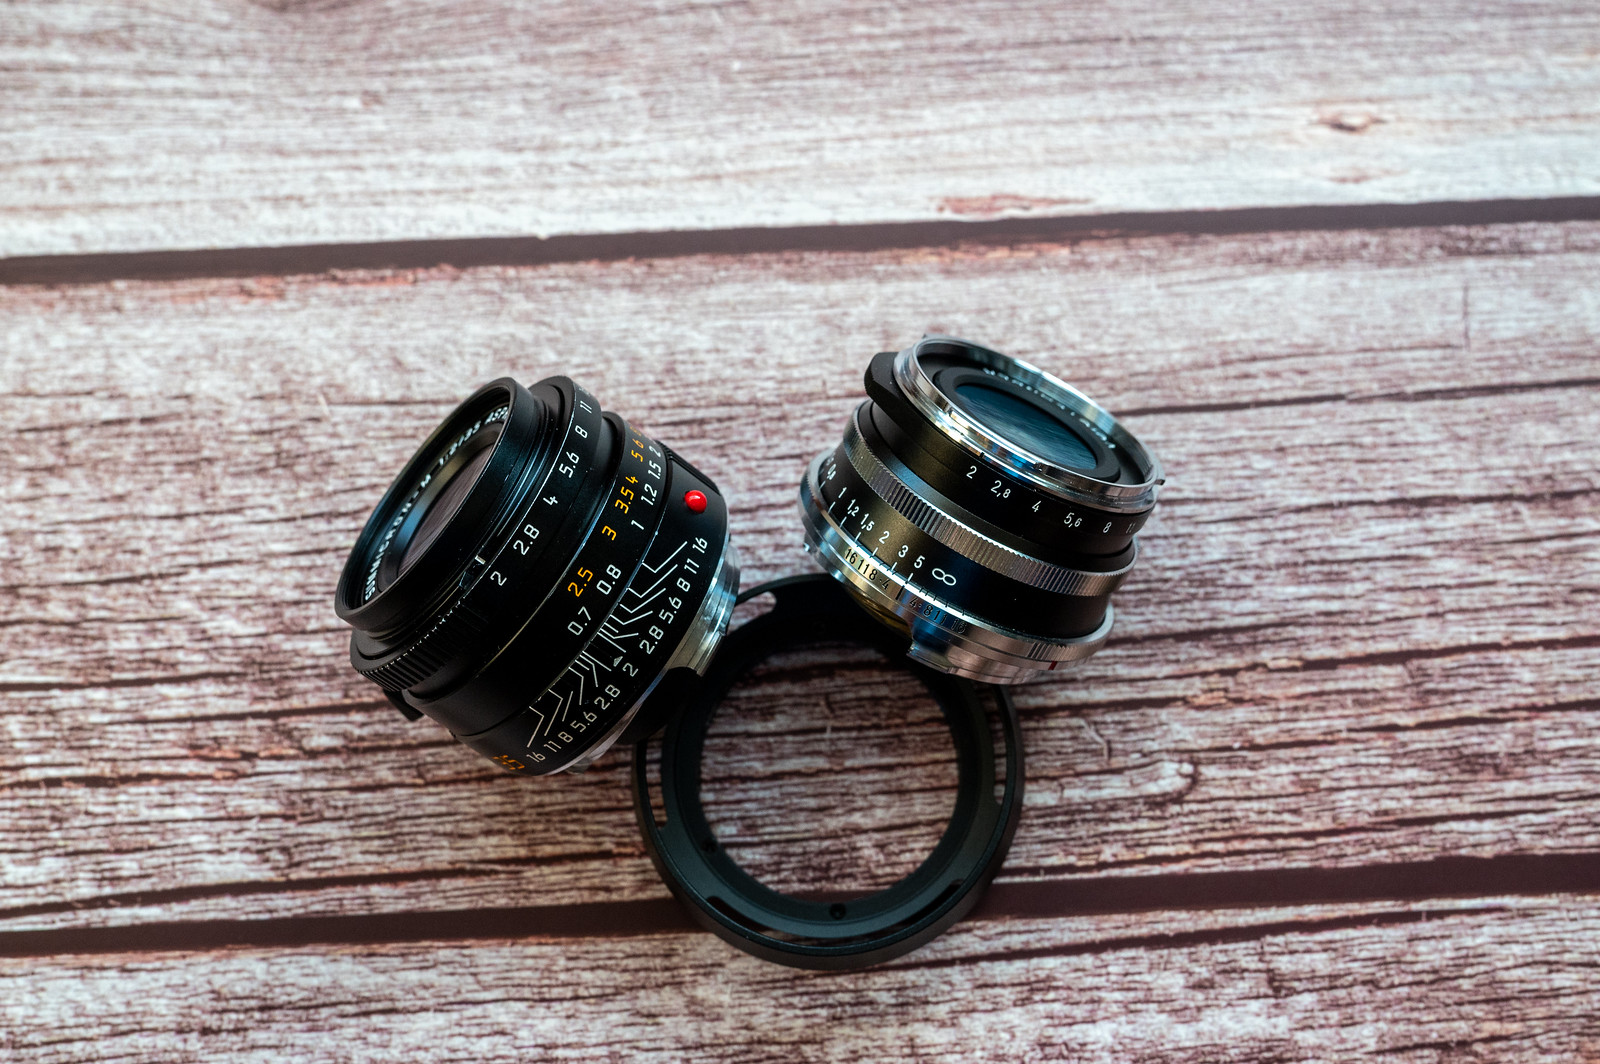 Review of the Voigtlander 35mm F2 Ultron – a contender to the